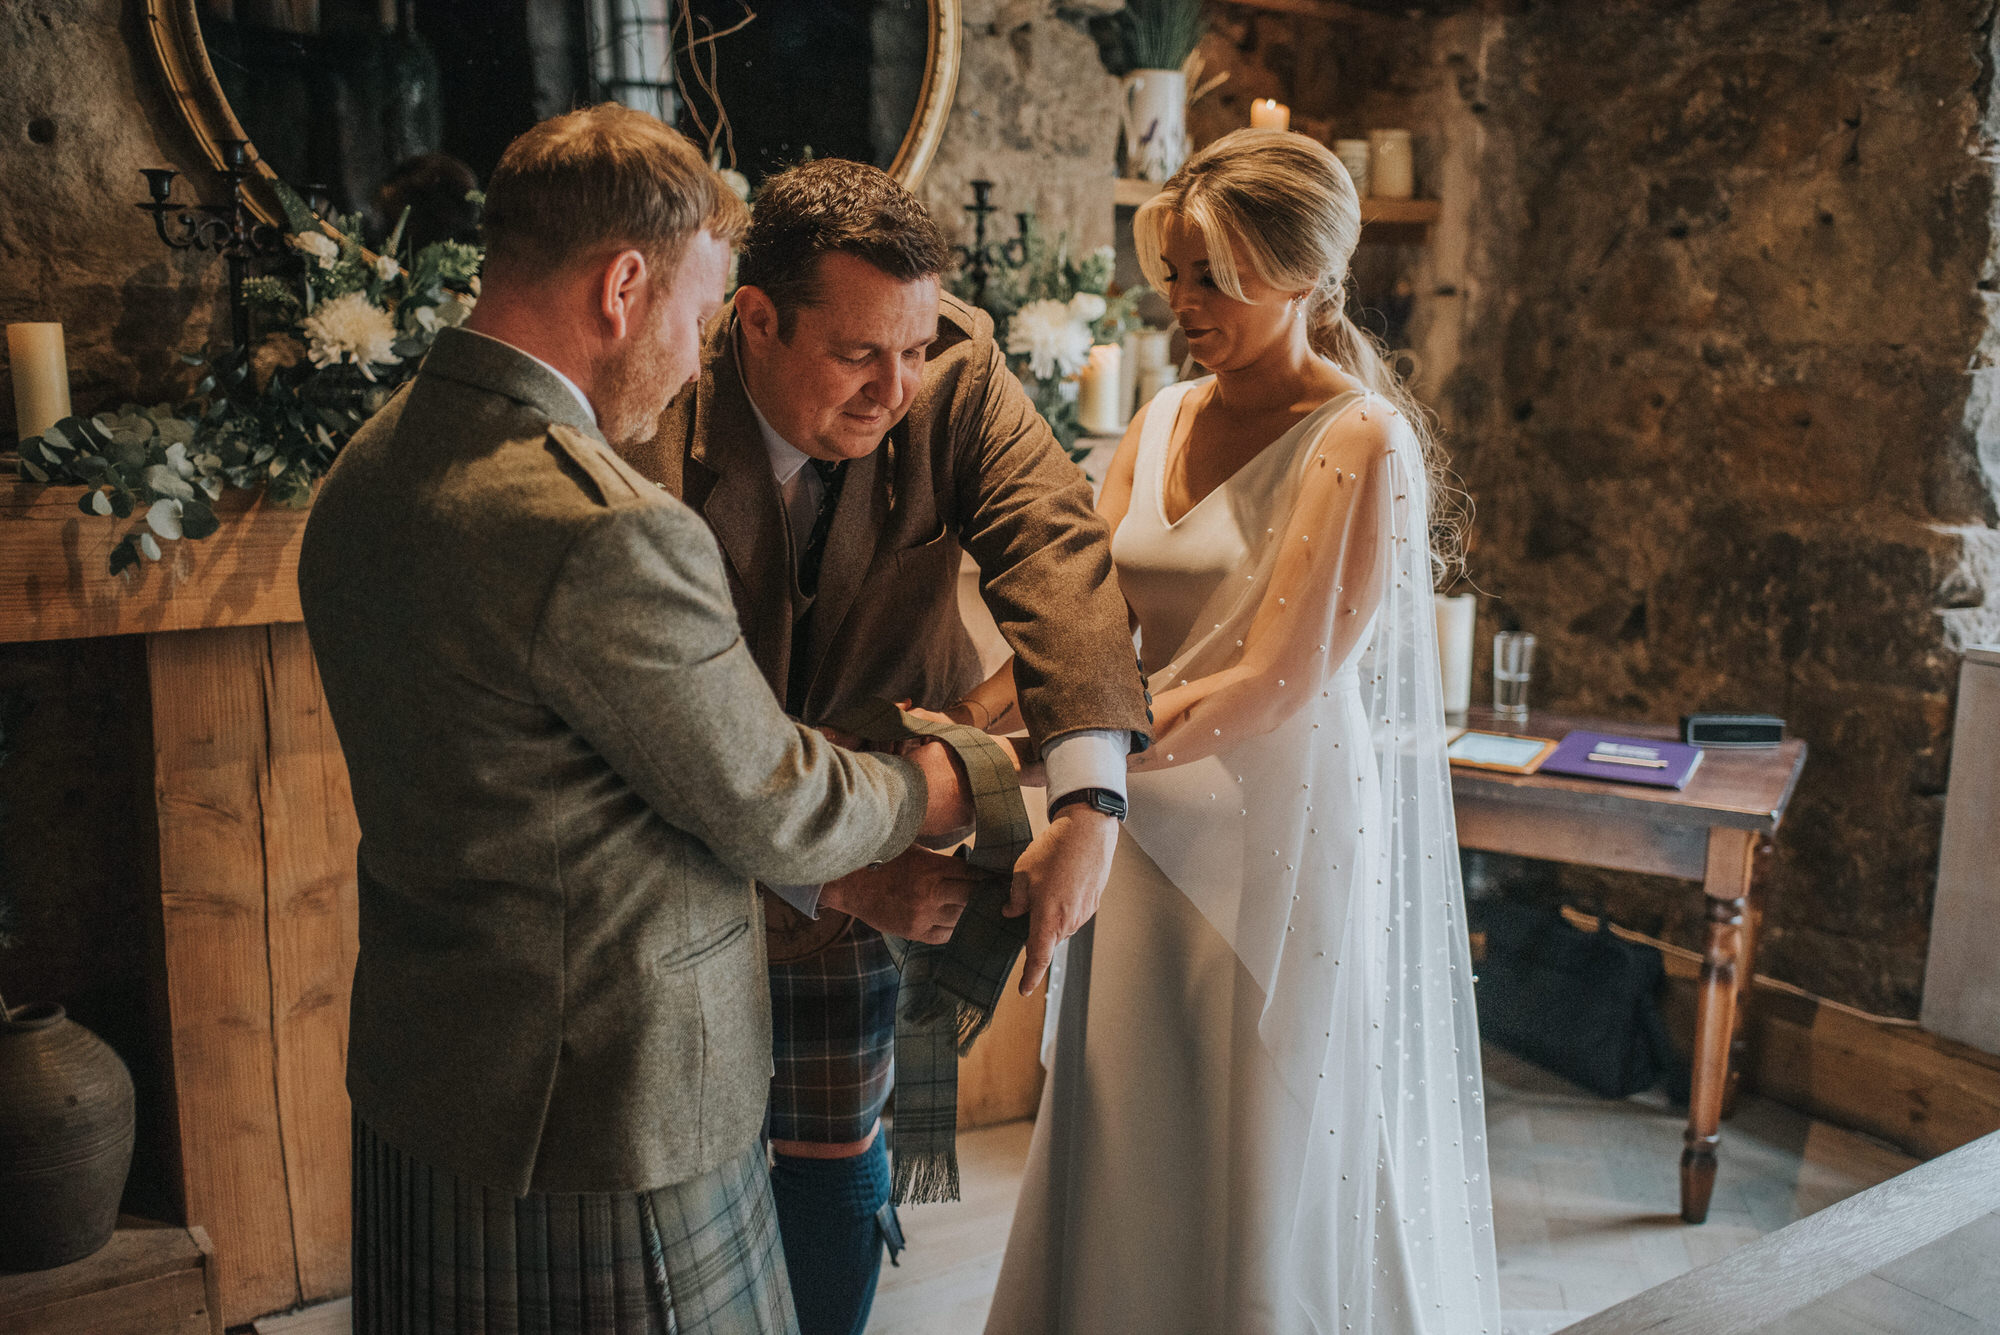 Alan Barr Humanist ties a hand fasting ribbon on the couple - He is tying the knot atThe Bothy, Glasgow!